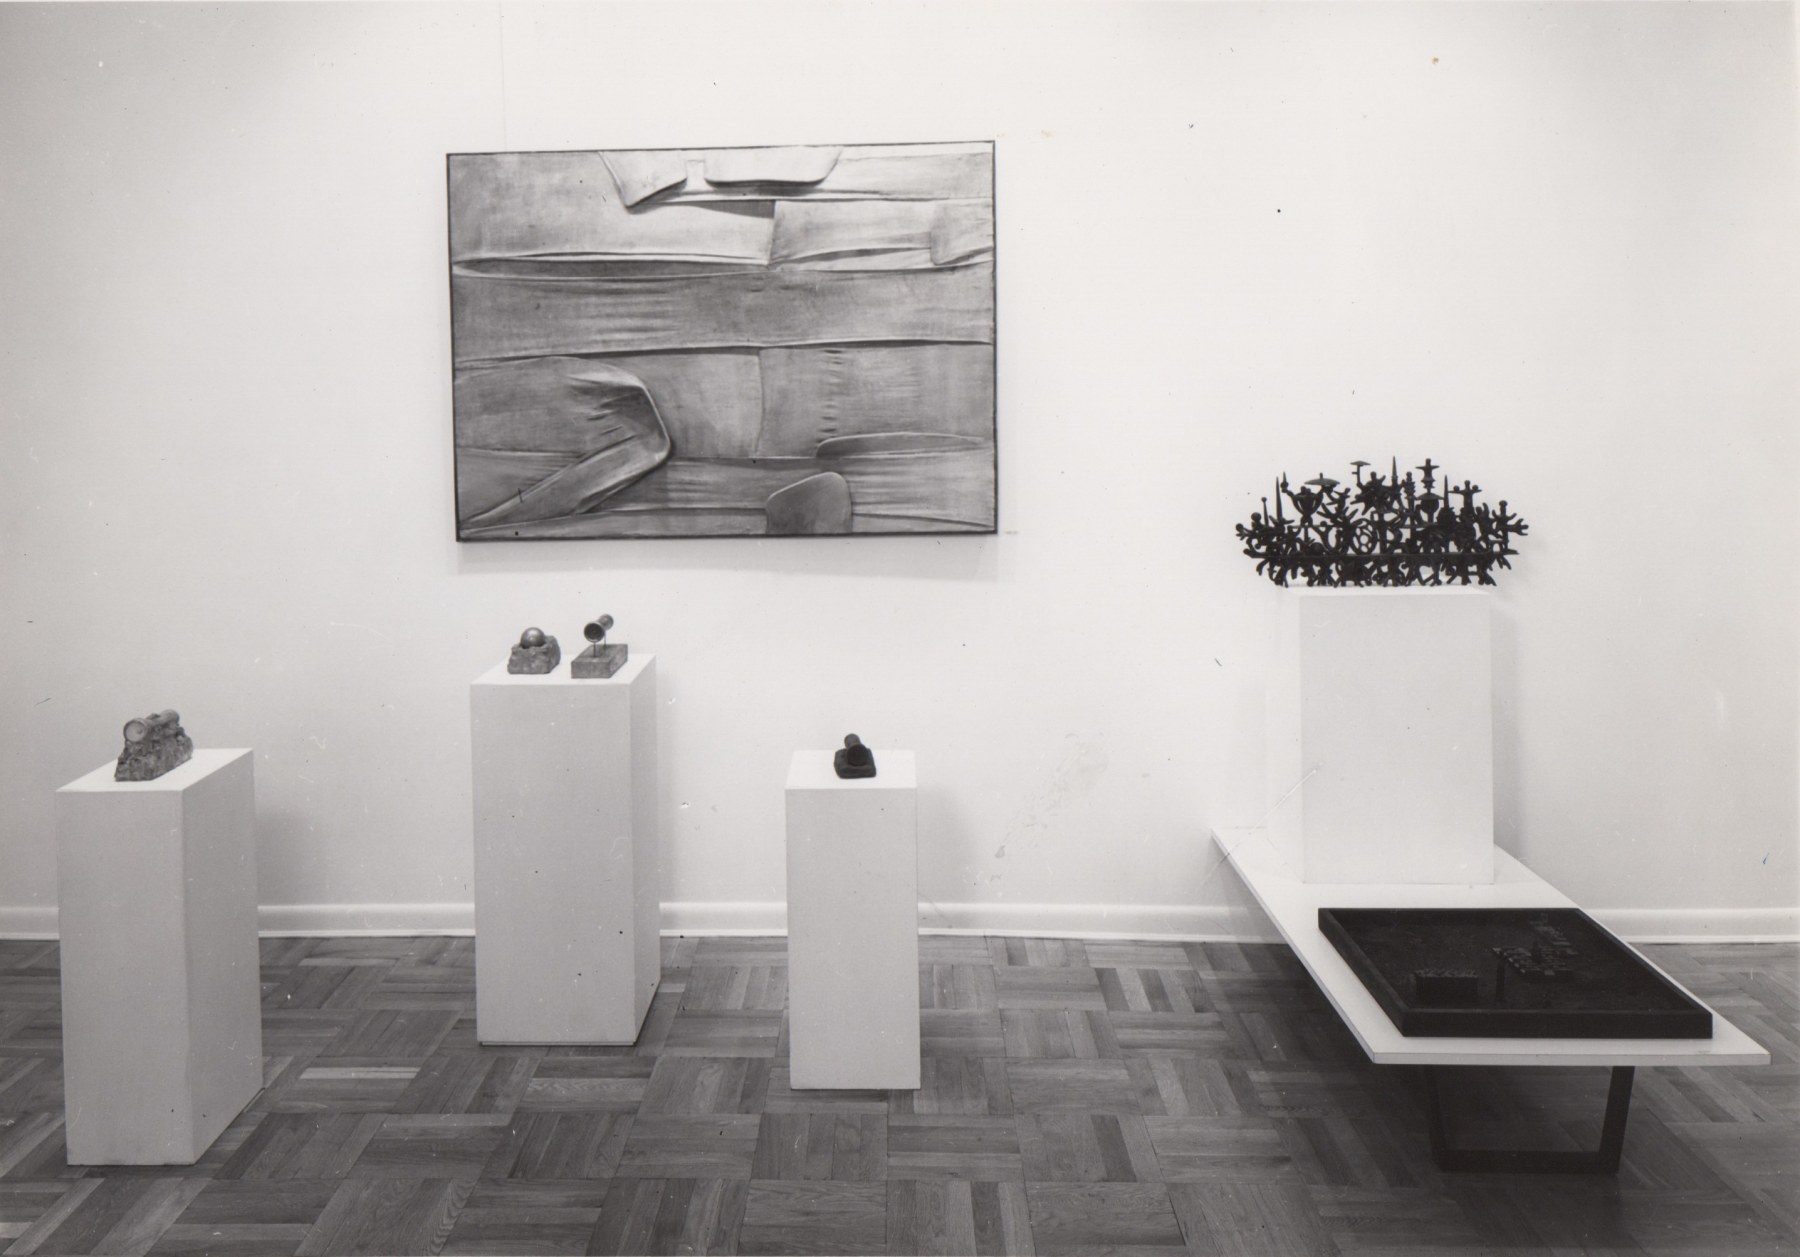 Installation view, Work in Three Dimensions, 4 EAST 77